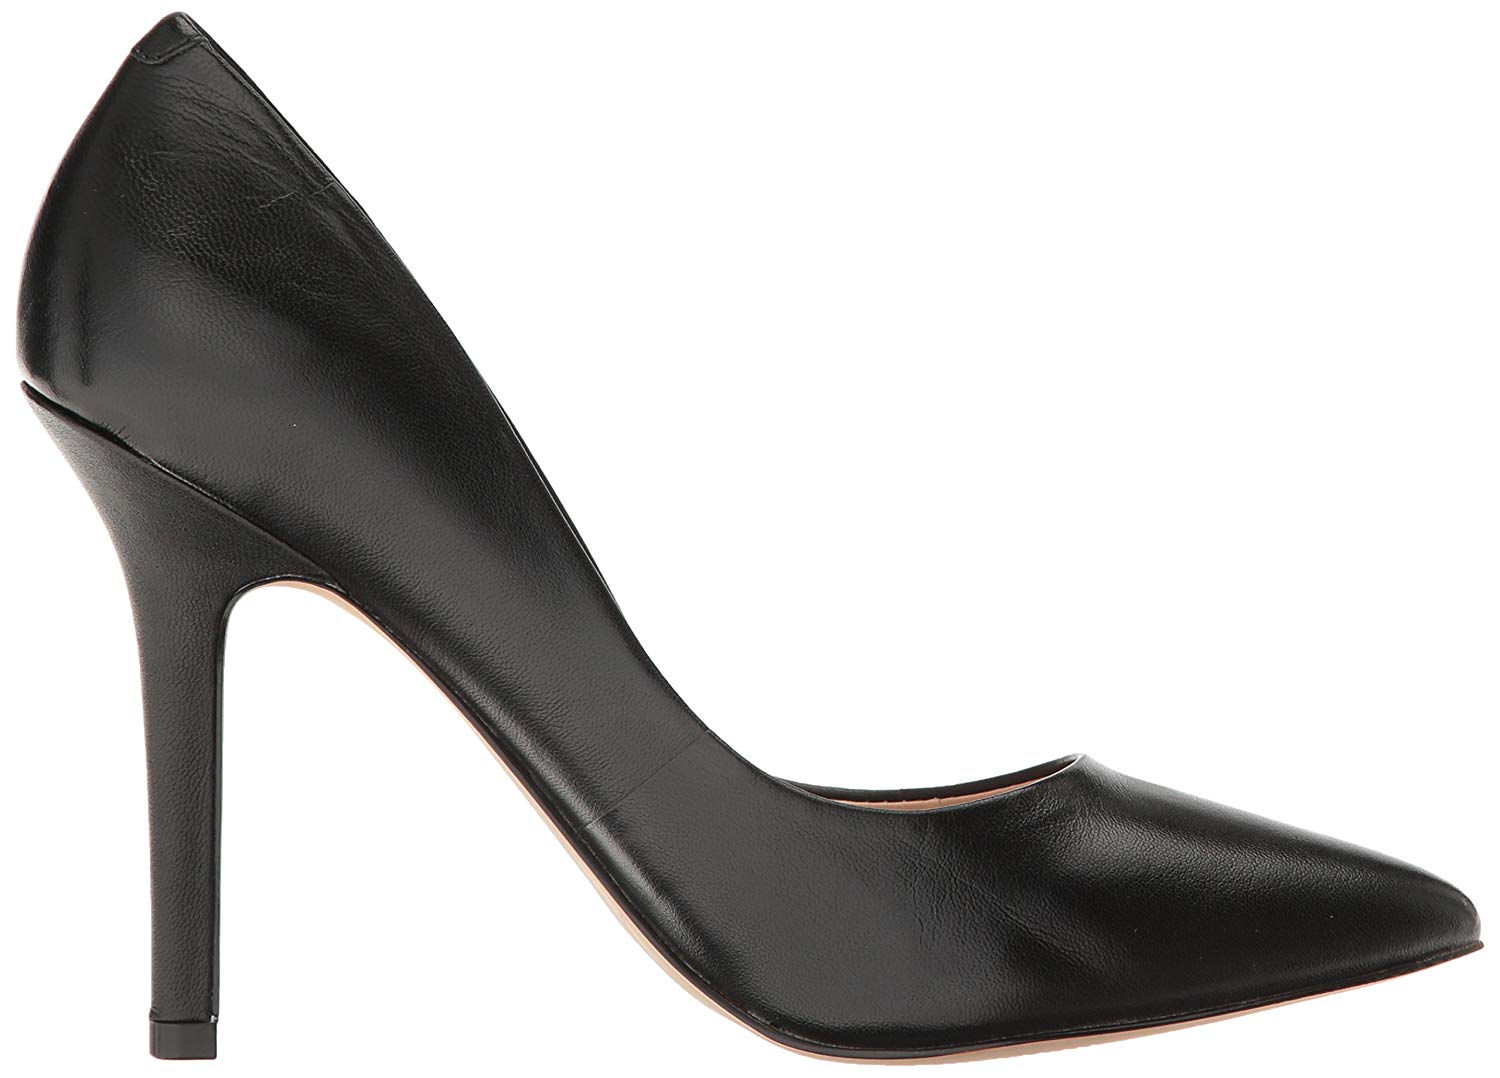 Charles by Charles David Womens Heels & Pumps in Black Color, Size 6.5 ...